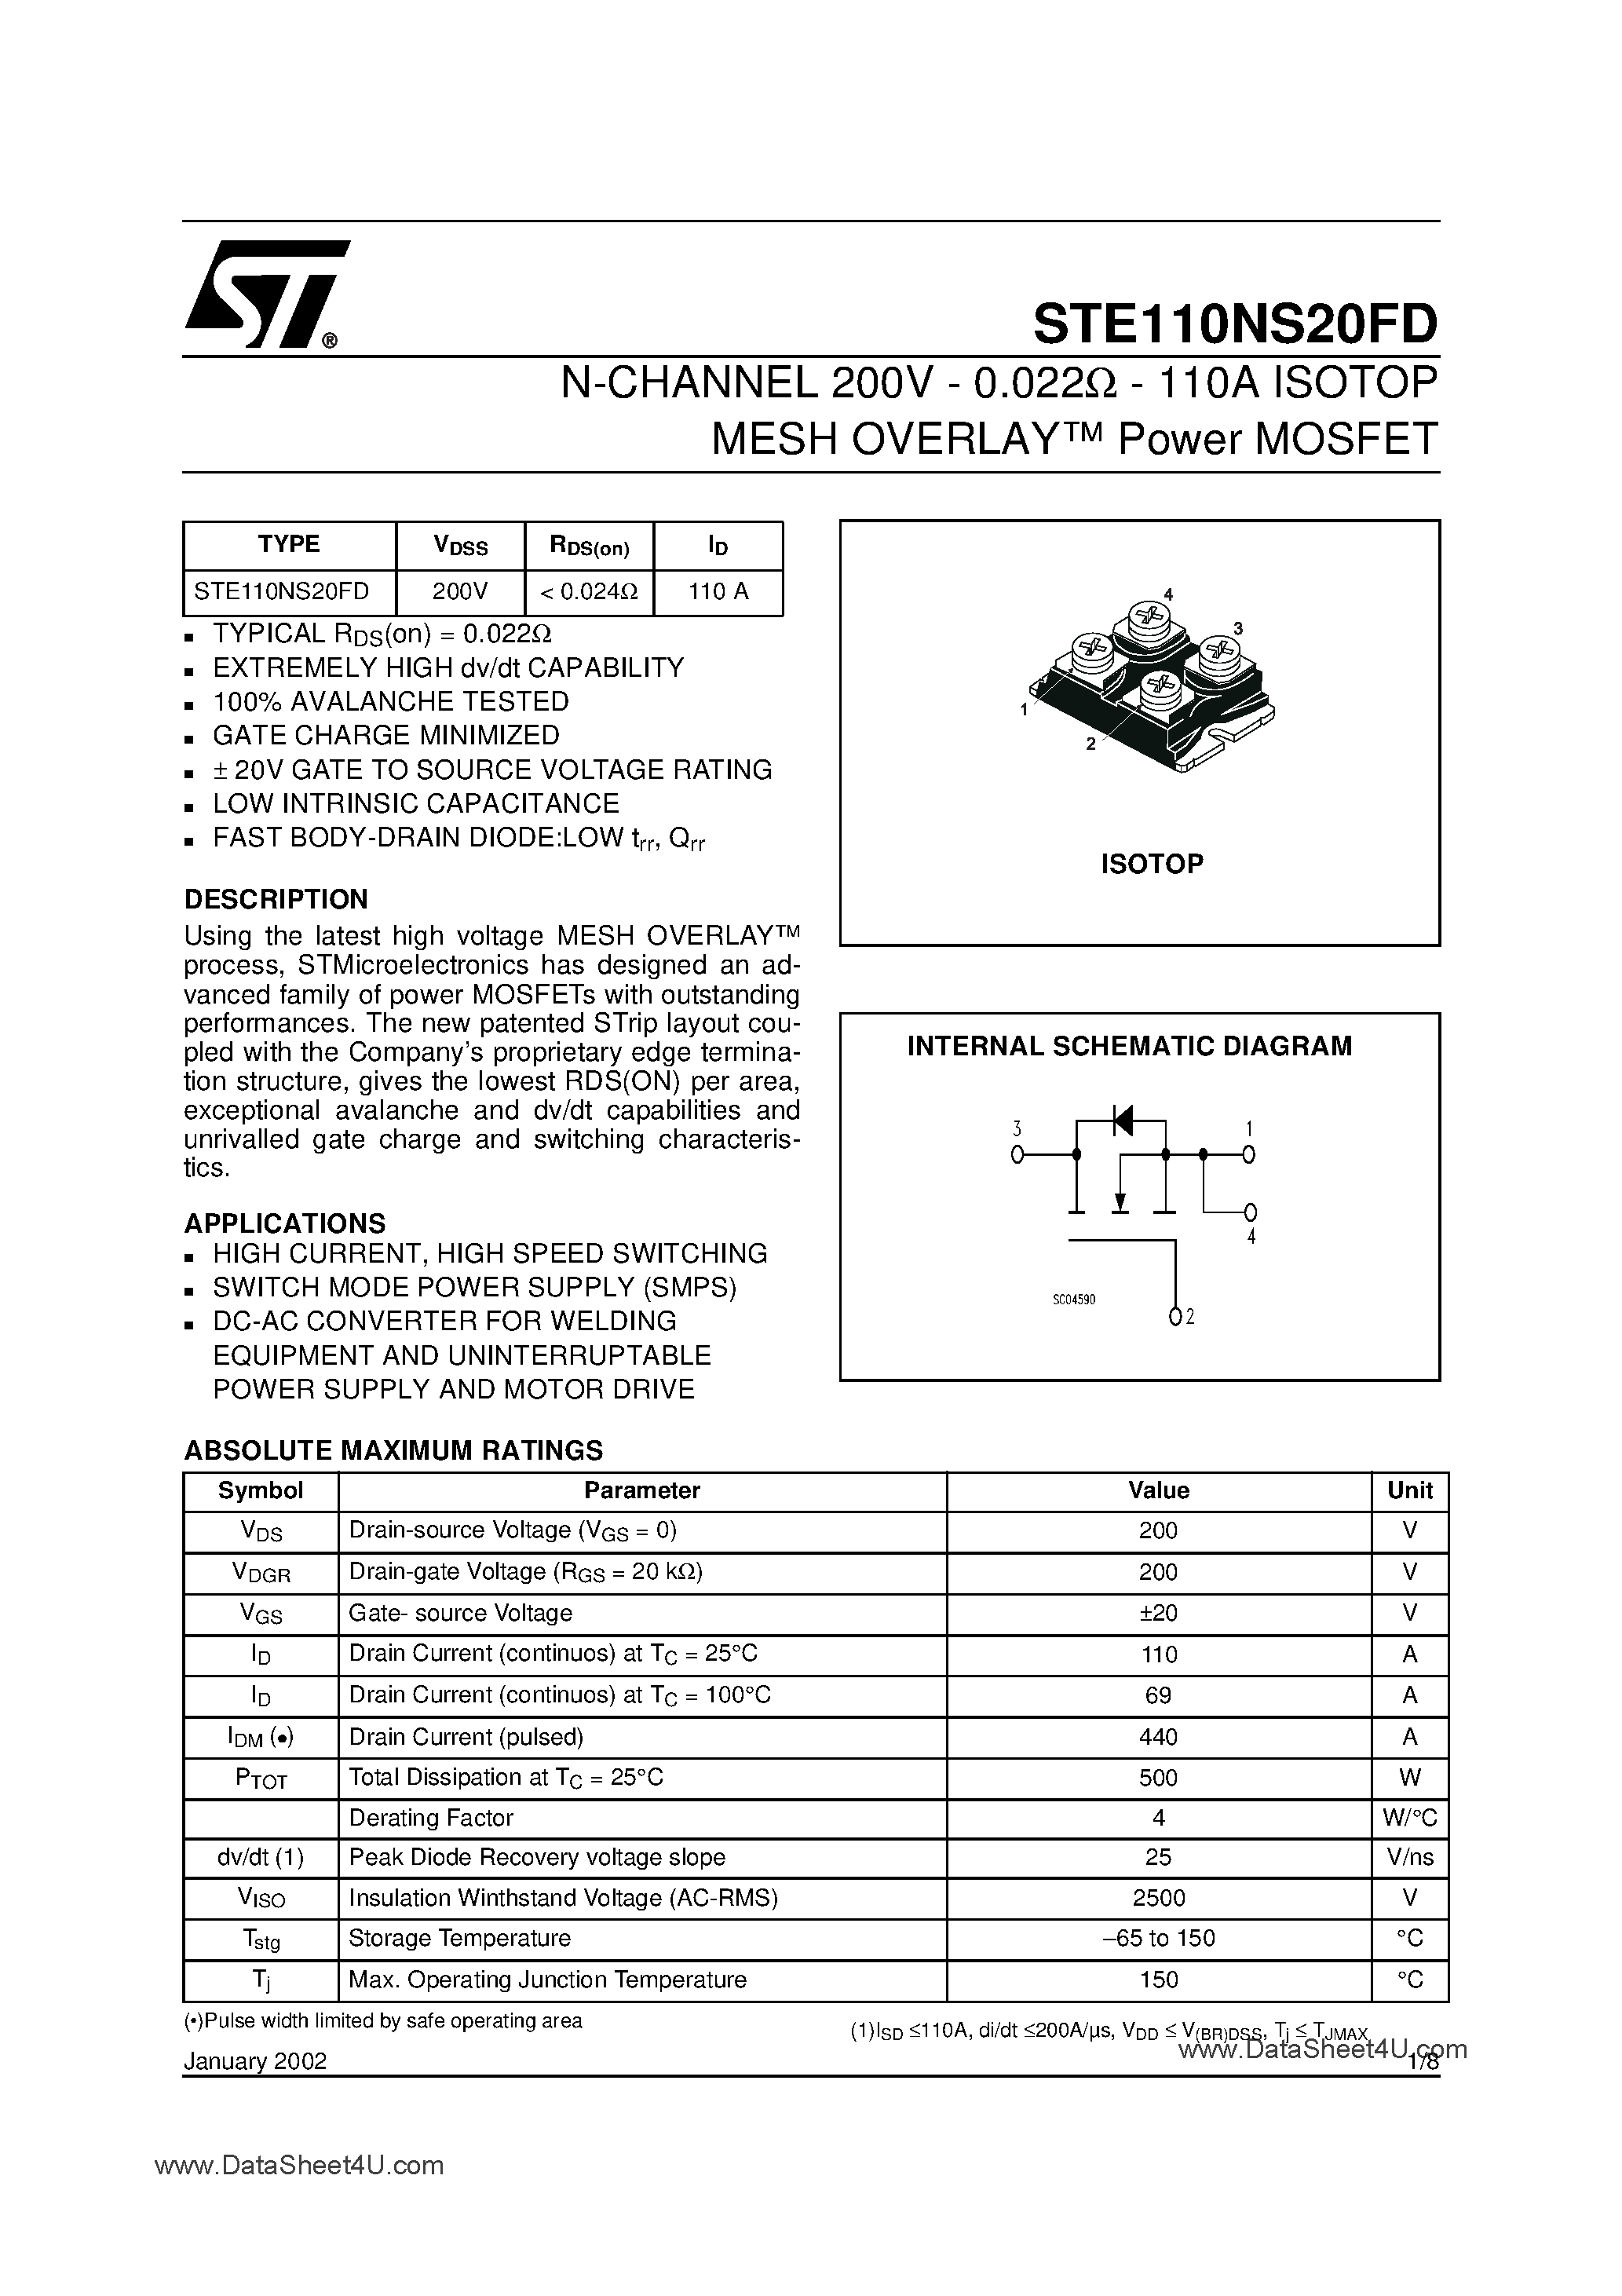 Даташит STE110NS20FD - N-Channel Power MOSFET страница 1